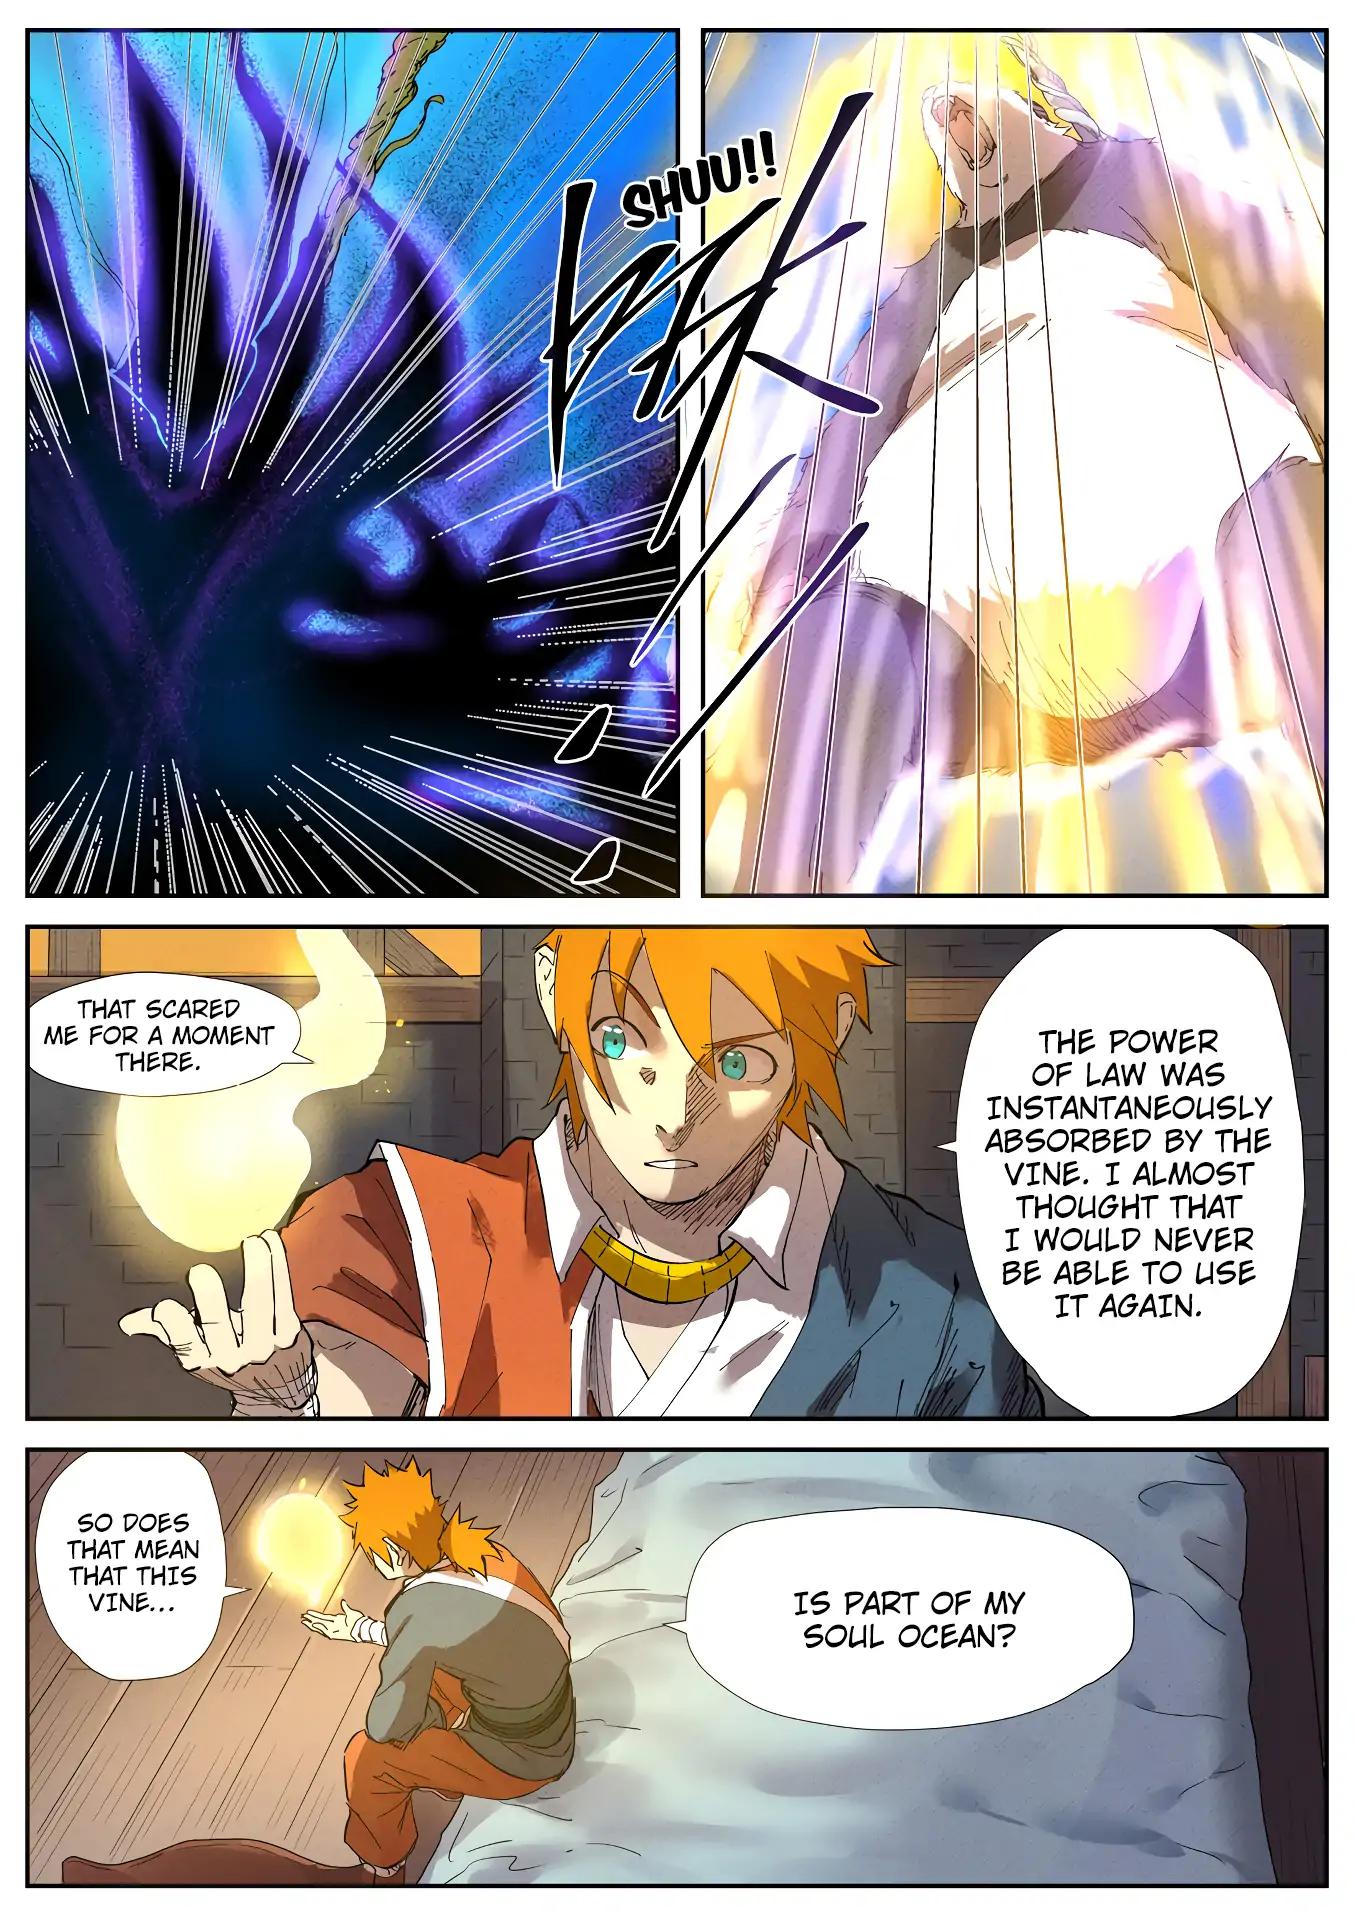 Tales of Demons and Gods chapter 233.5 page 7